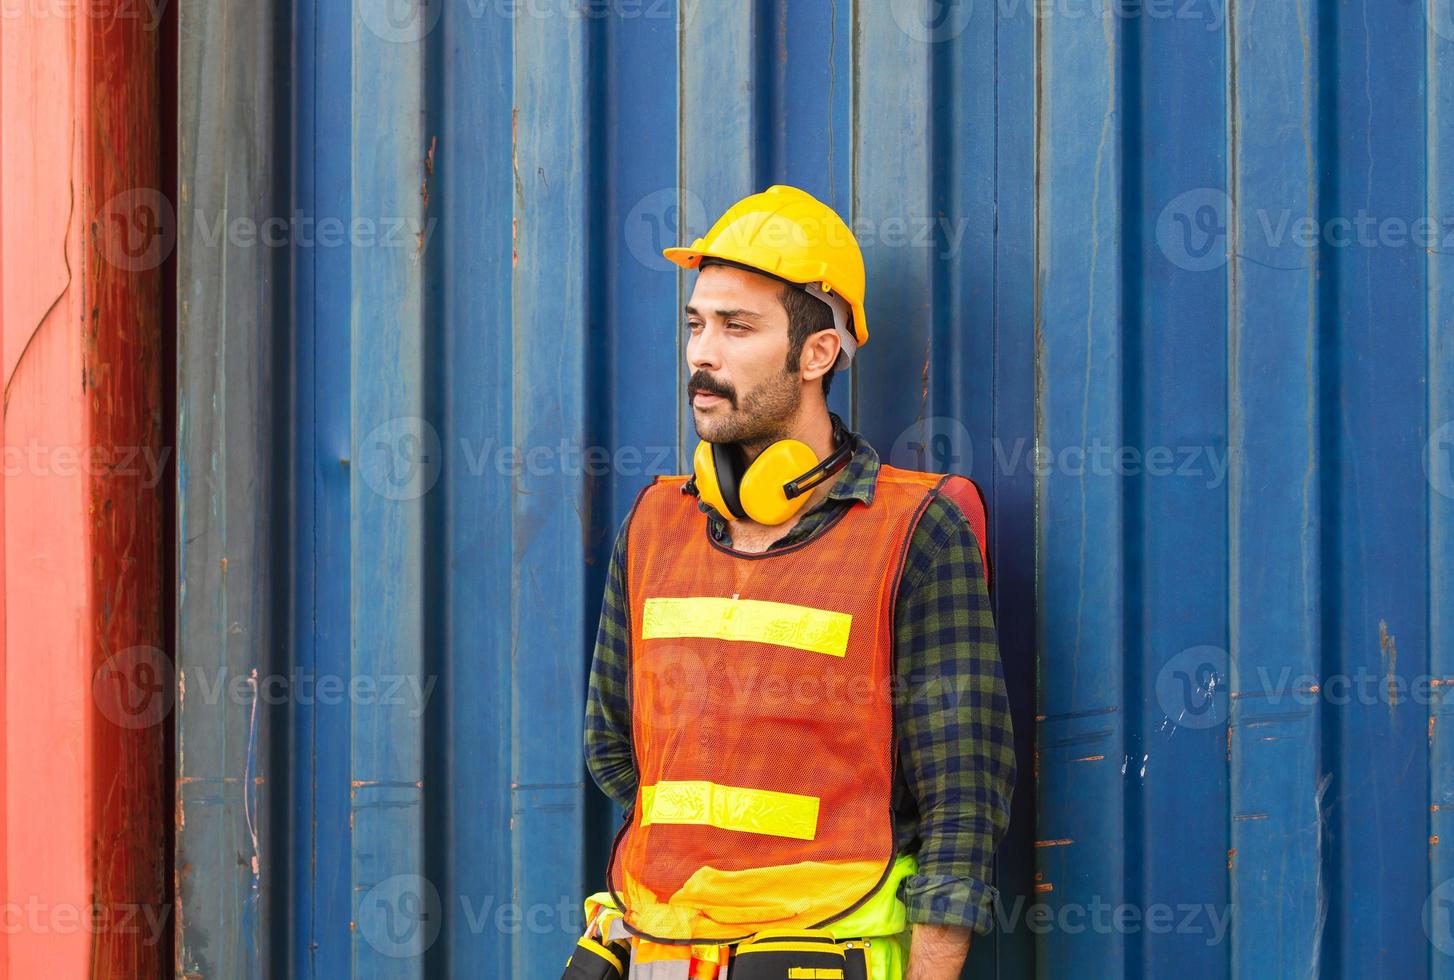 Worker man standing relax with a cigarette smoke break, Labour takes a cigarette break at container box photo